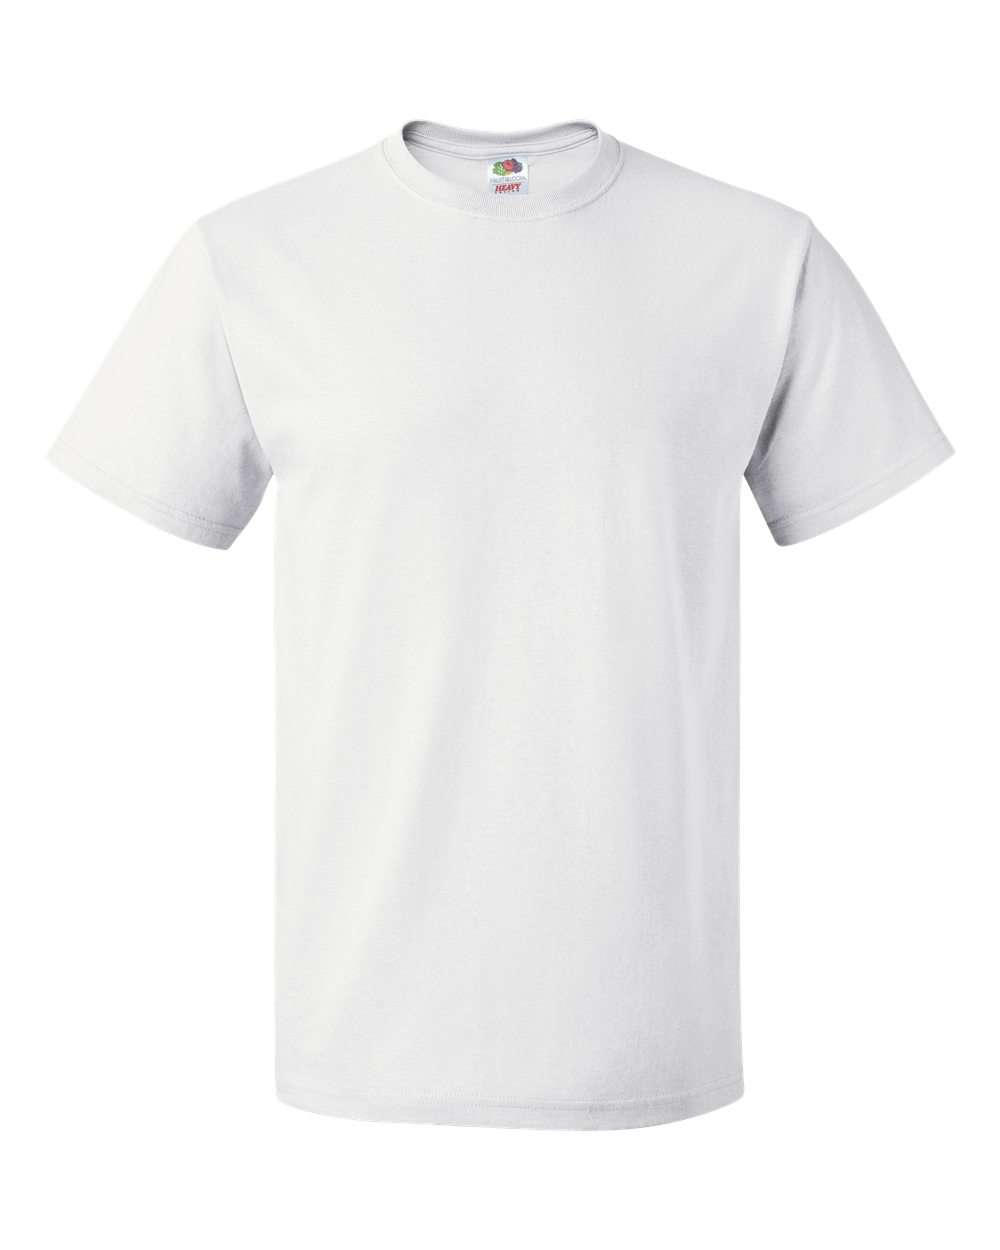 HD Cotton Short Sleeve T-Shirt - Fruit of the Loom 3930R